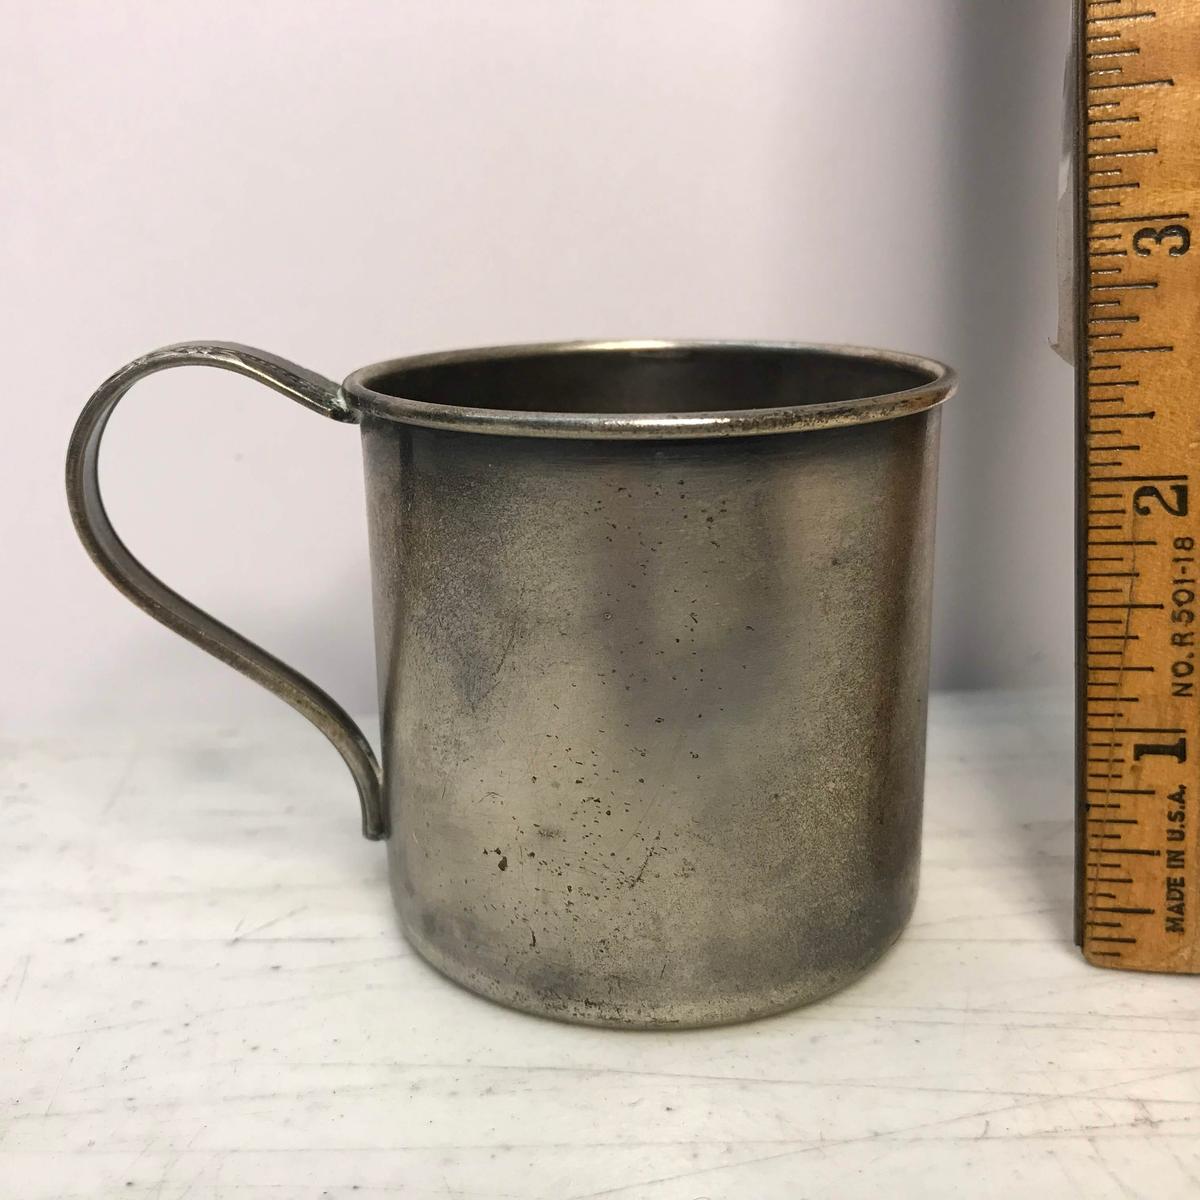 Vintage Silver Plate Over Copper Baby Cup with Spoon Handle by Rogers 1881